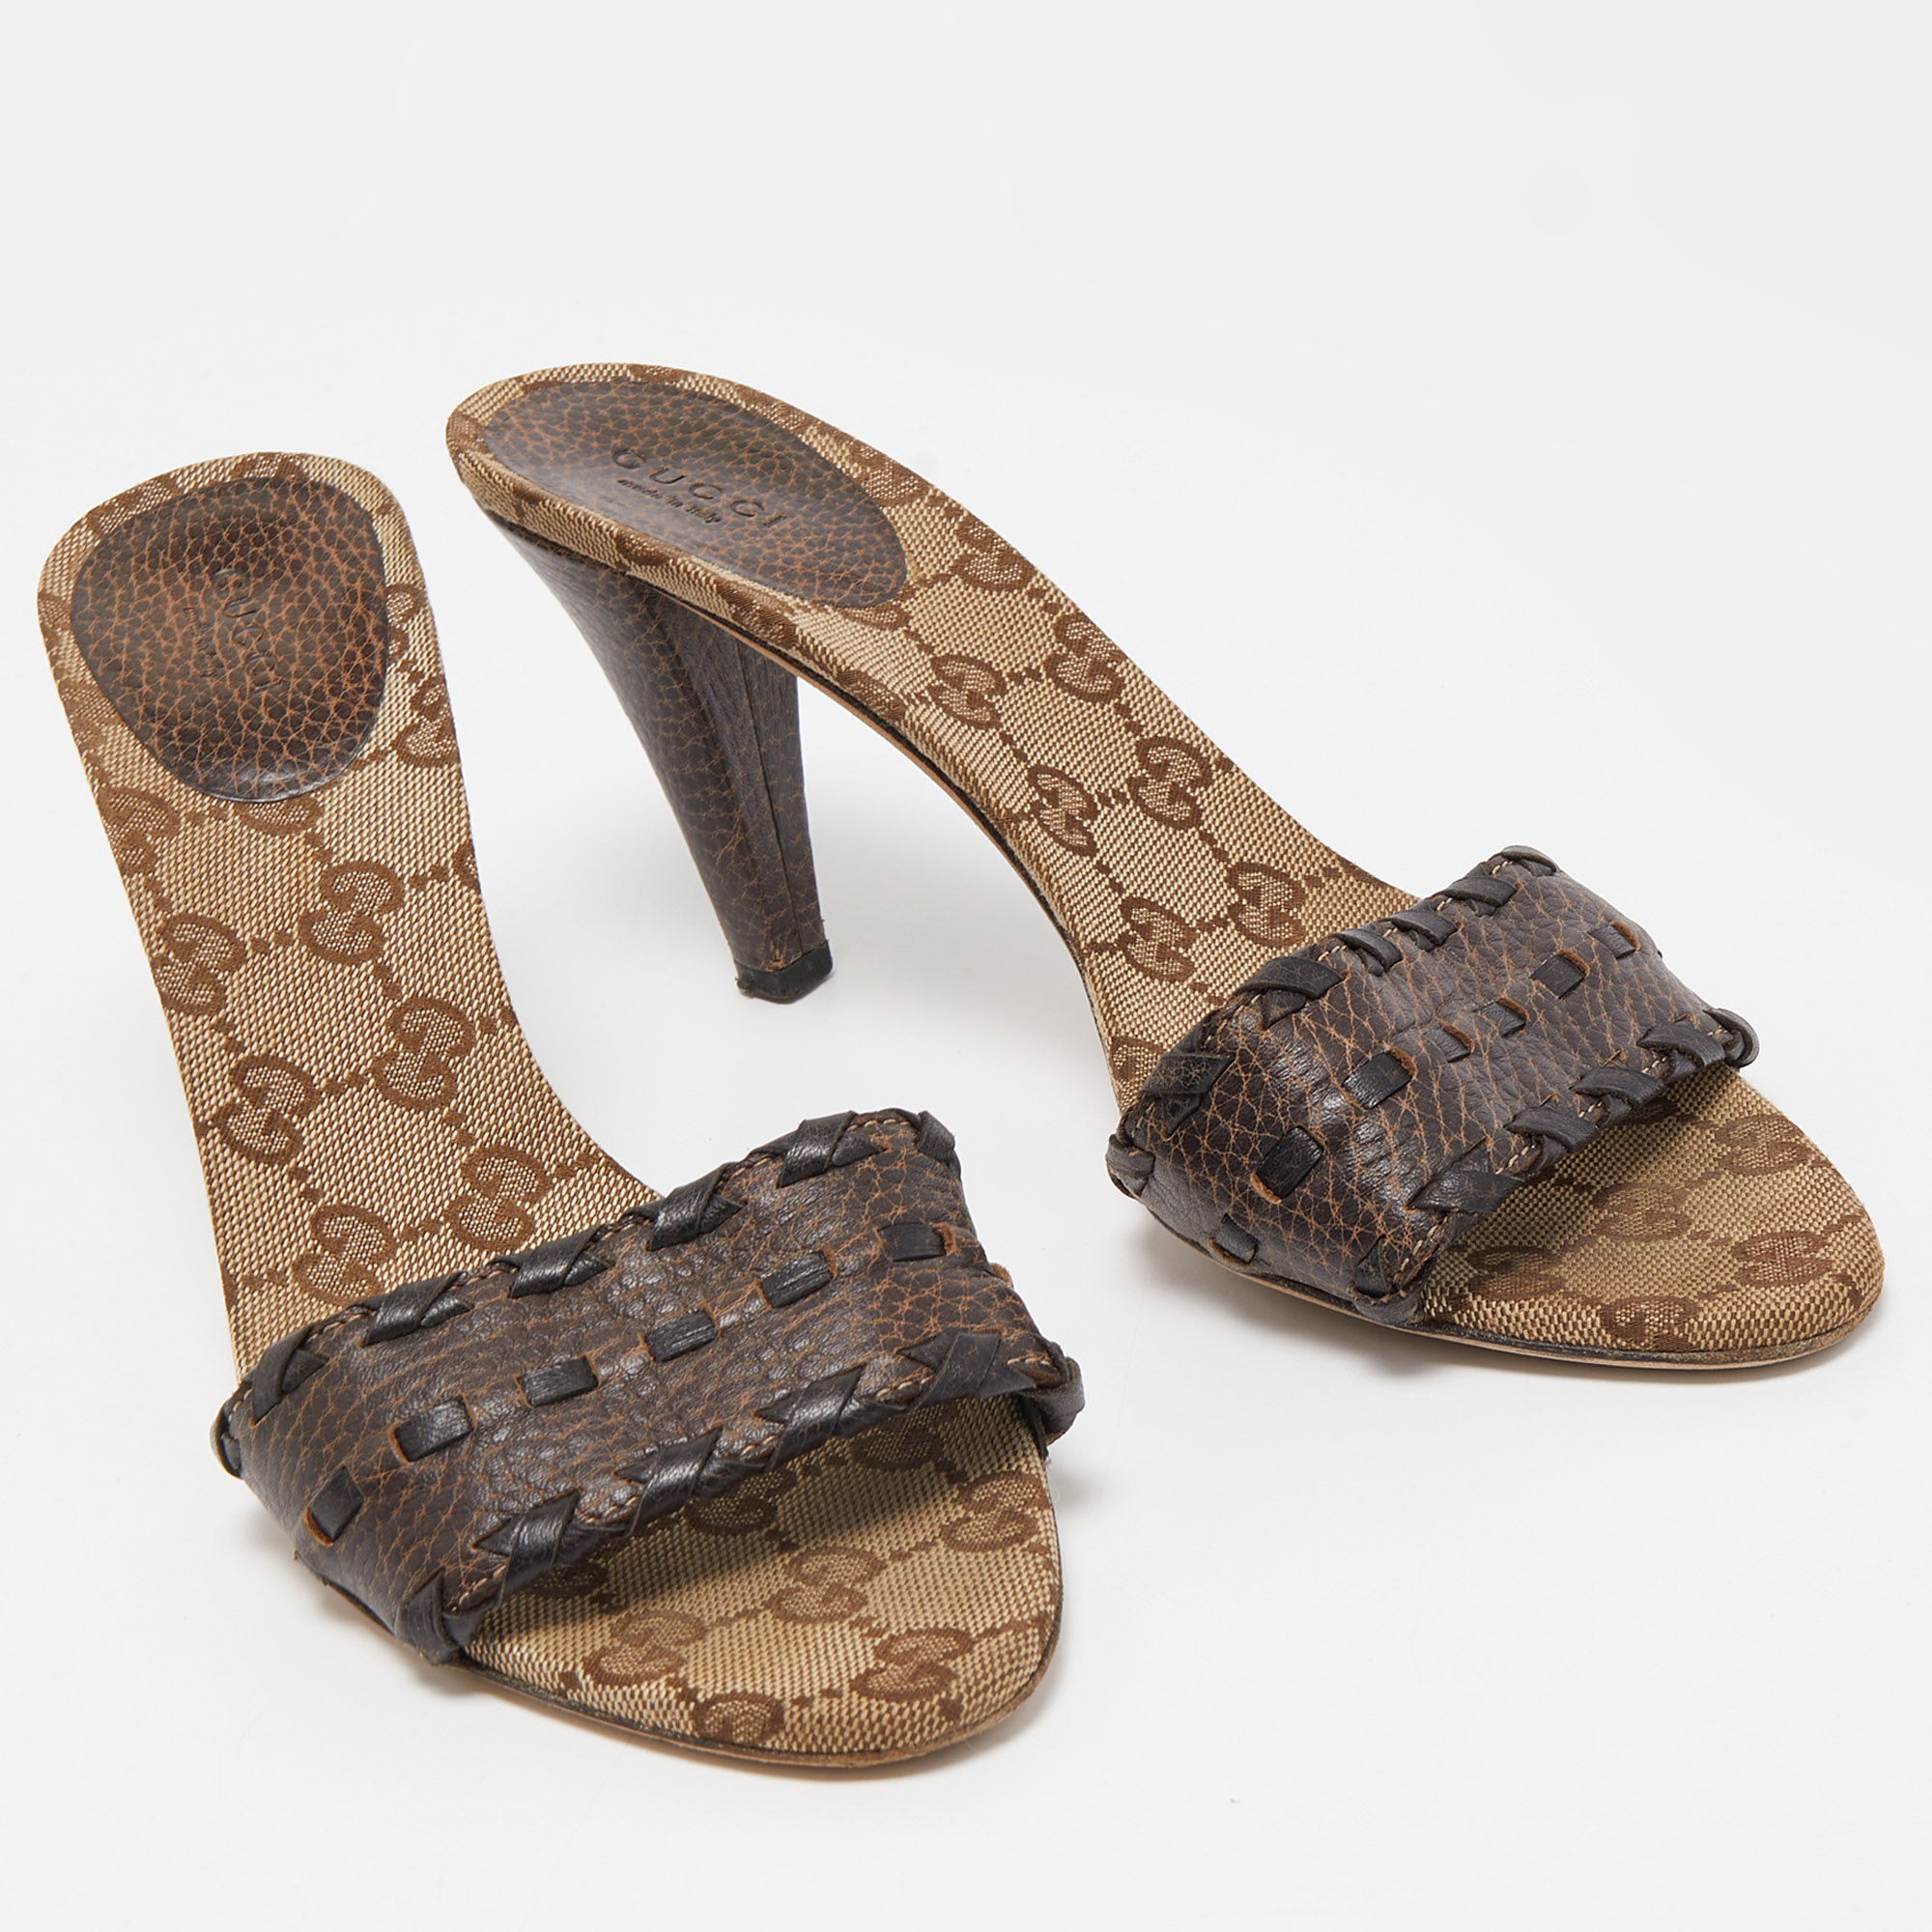 Gucci Brown Leather Slide Sandals Size 38.5